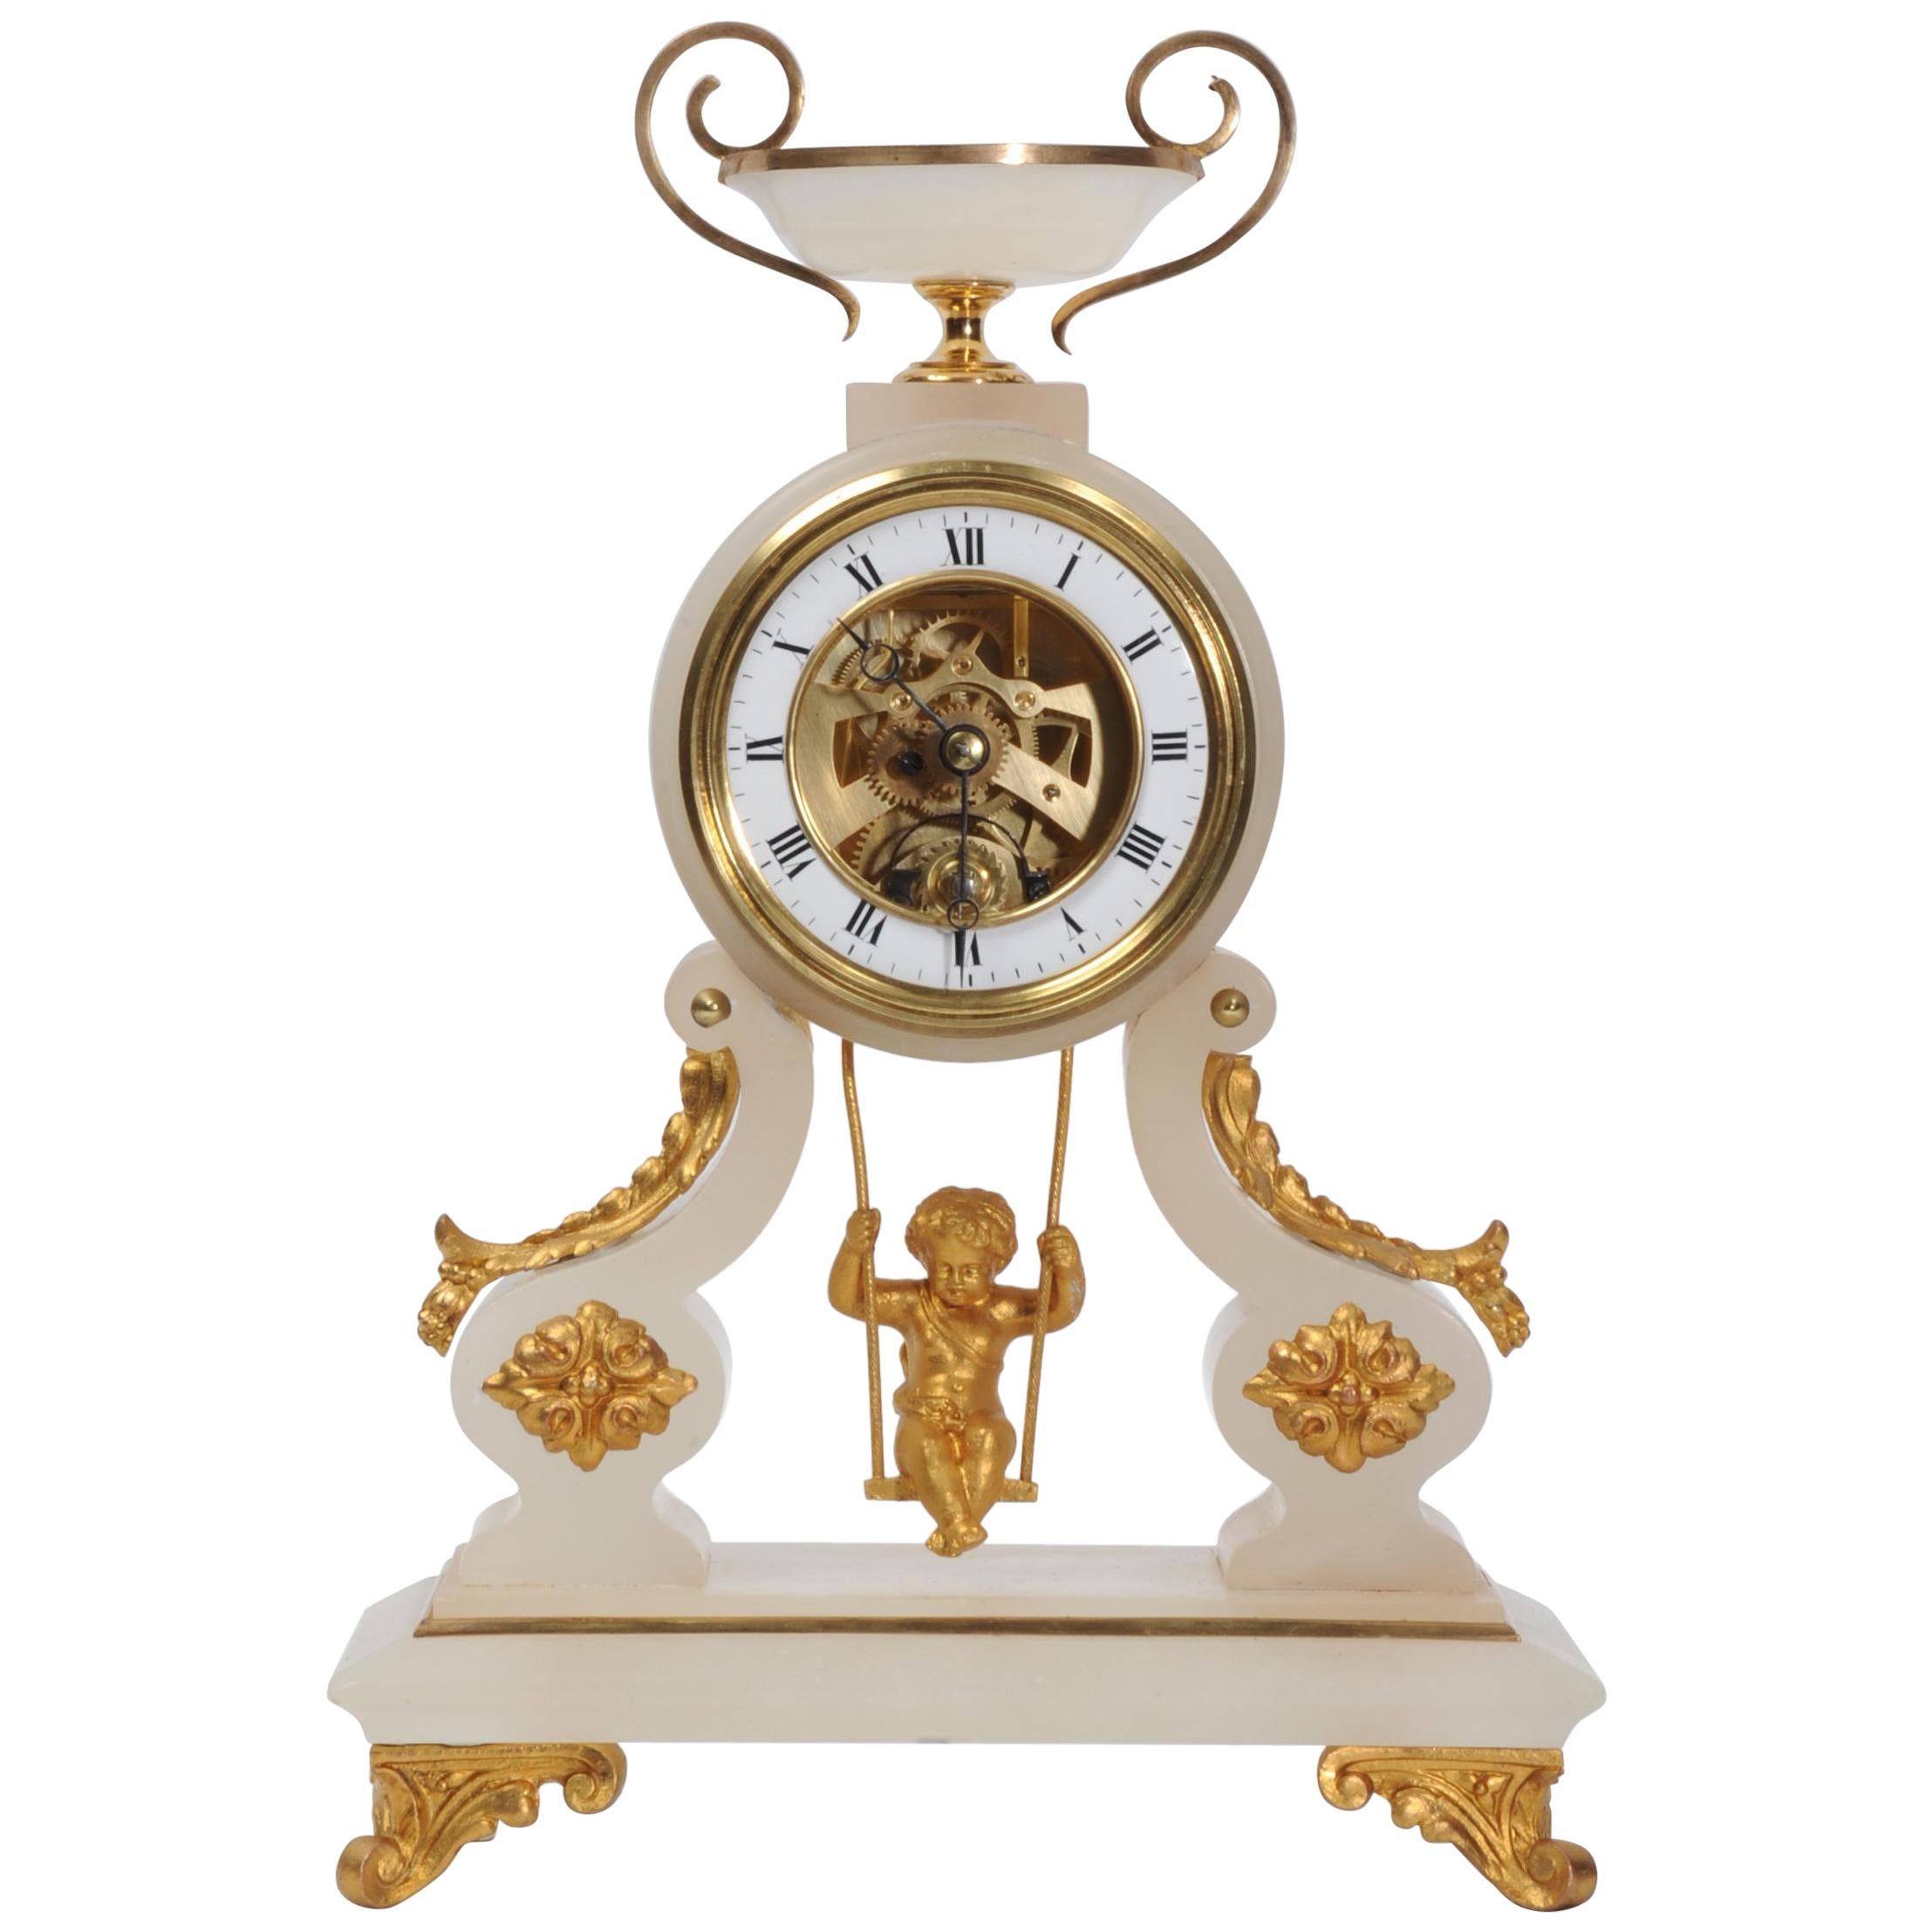 Rare Cherub on a Swing Antique French Boudoir Clock with Visible Escapement